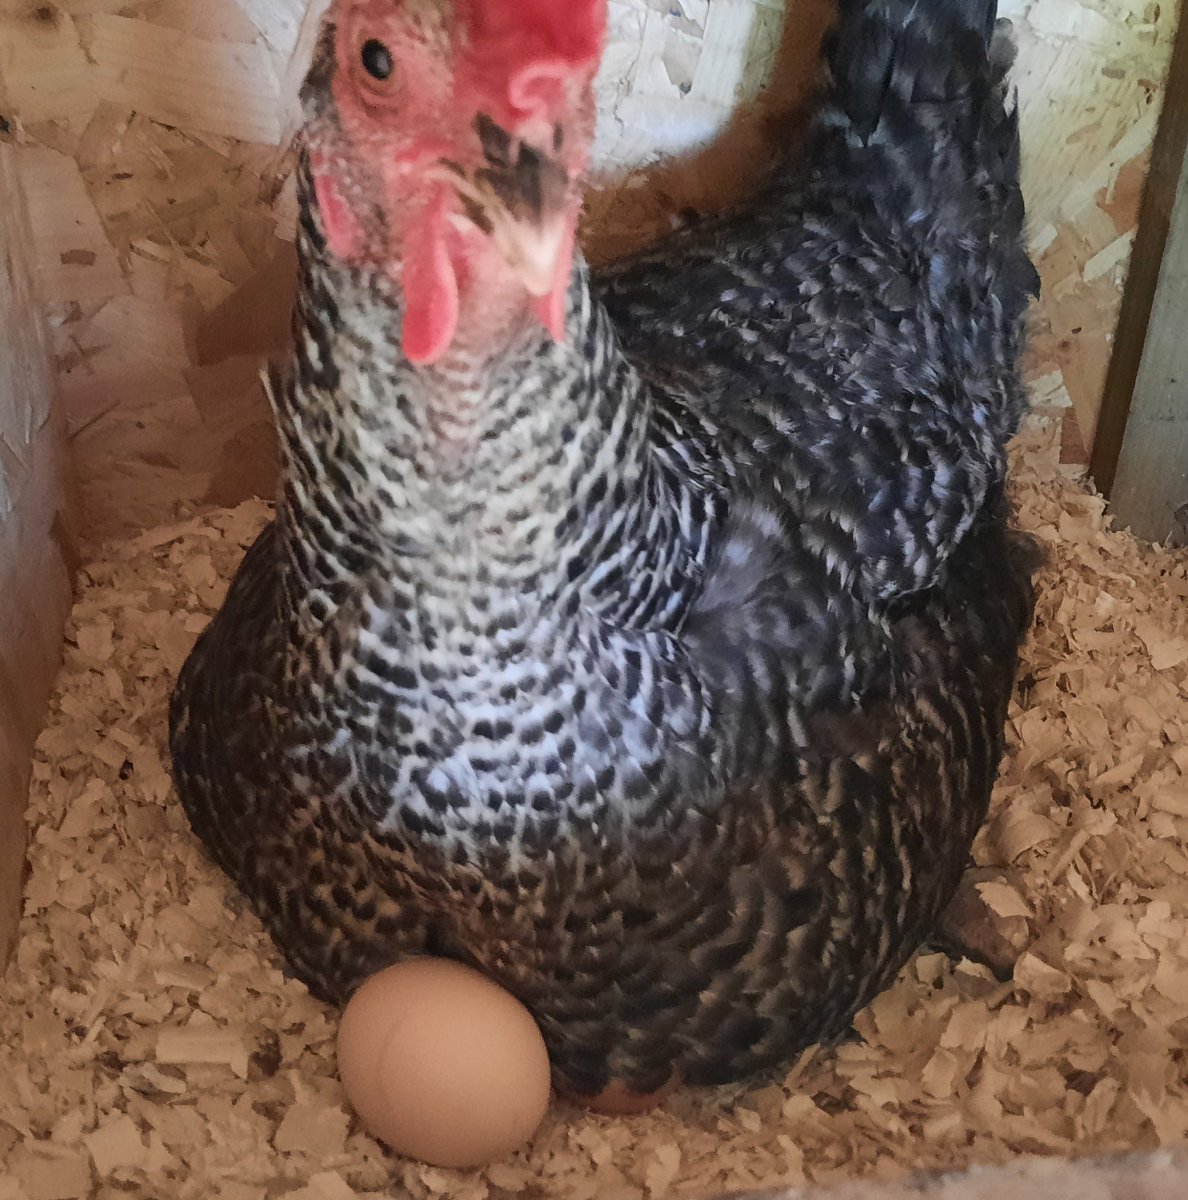 This Saturday we will be supporting Macmillan Cancer coffee morning at the farm. There will be stalls, flowers, music and plenty to eat... Get to meet our new chicks.